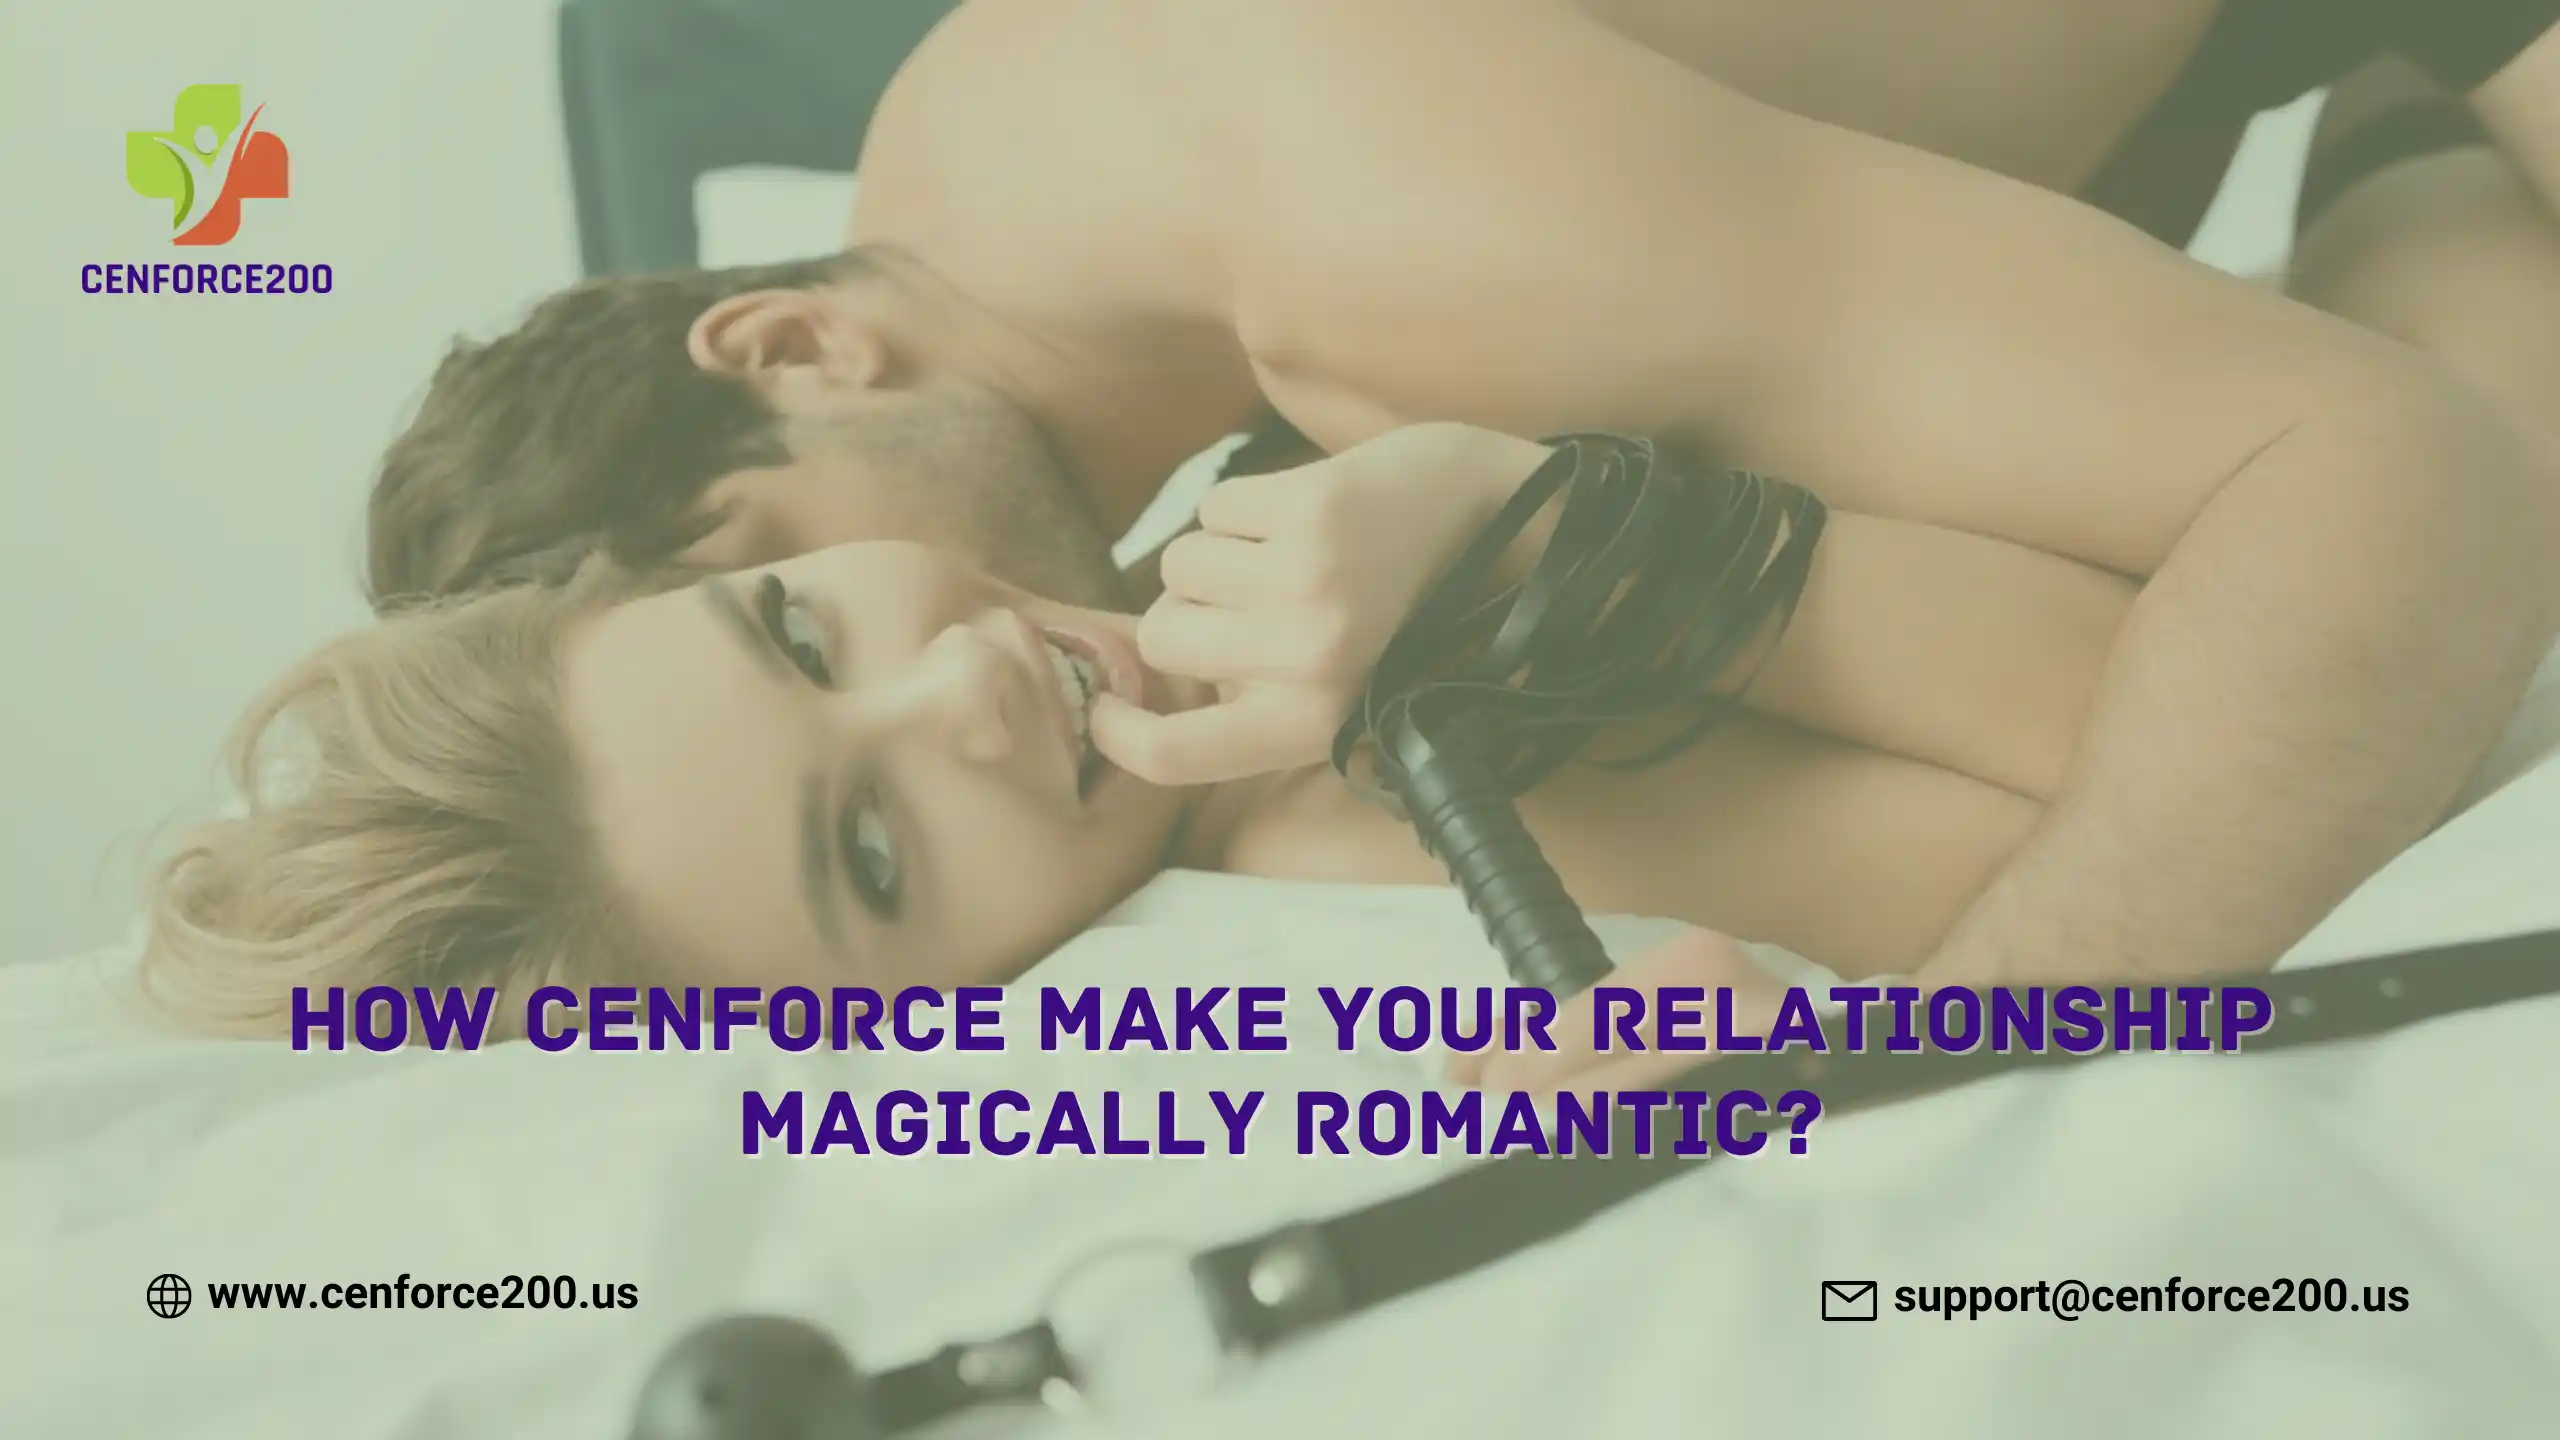 How Cenforce Make Your Relationship Magically Romantic?